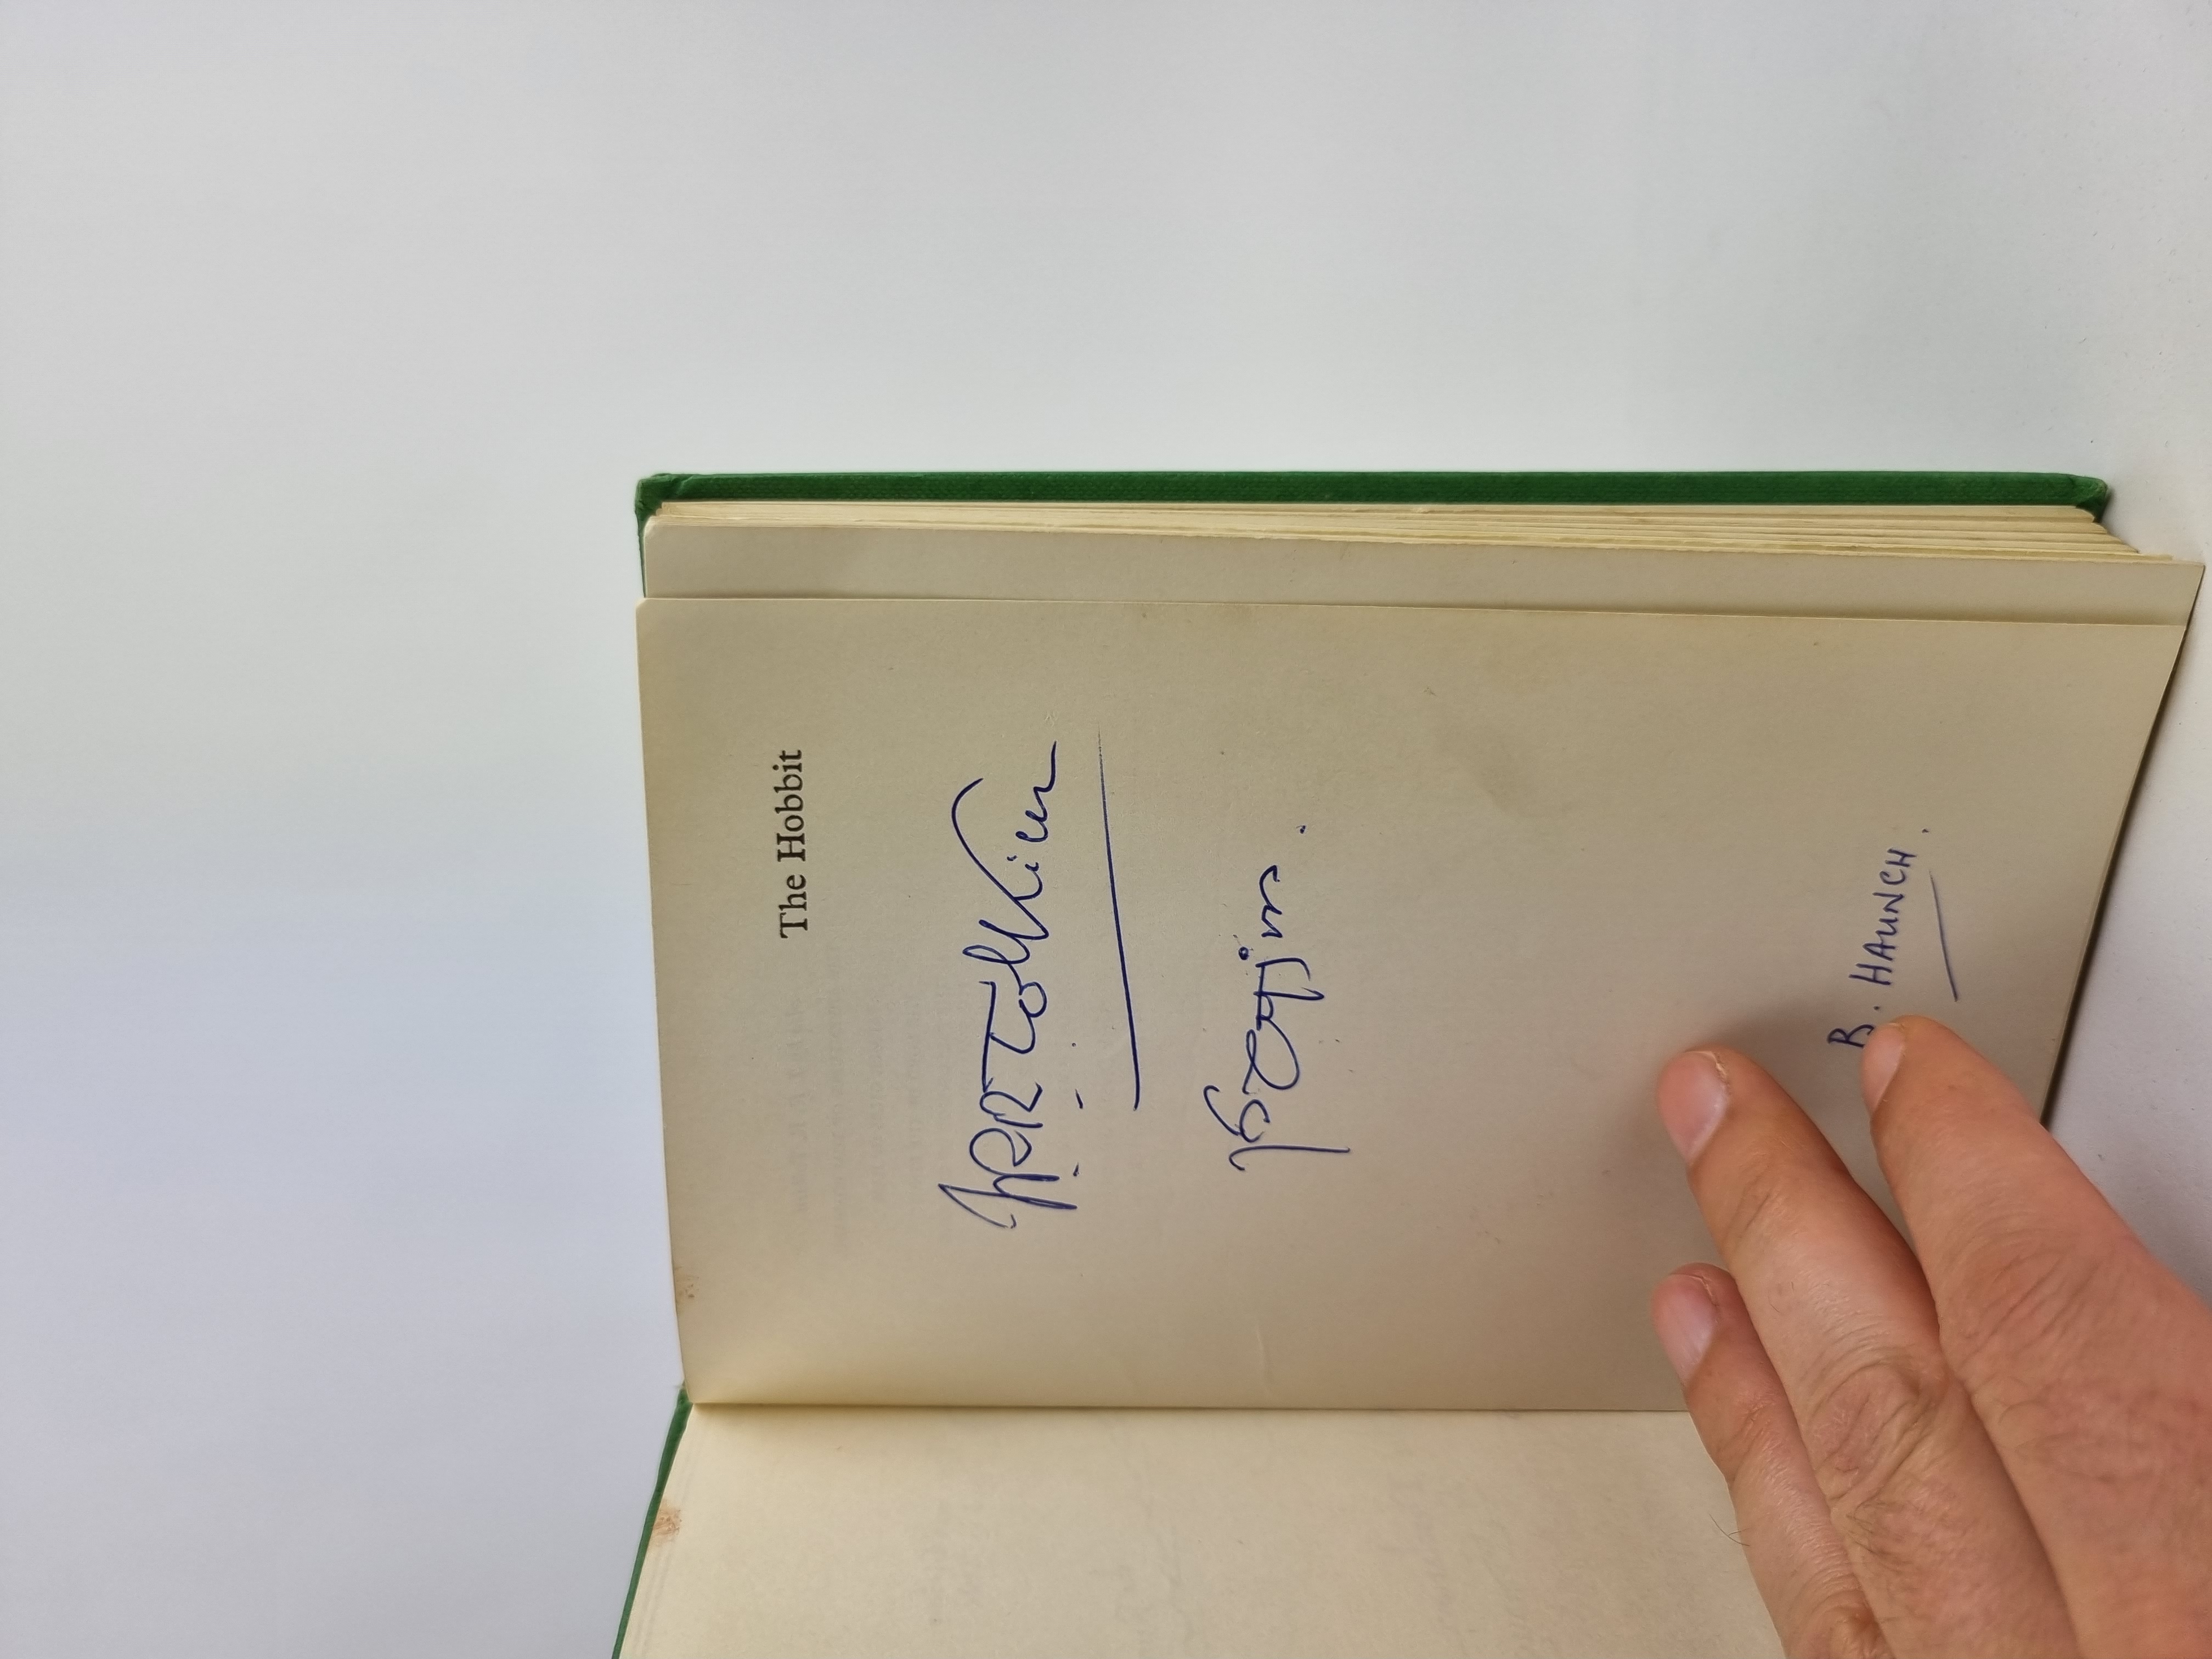 Don't miss your chance to own an incredibly rare copy of The Hobbit signed by J.R.R. Tolkien. This sixth impression edition from 1971 features a Quenya inscription in Elvish under the signature, which is the only known example to exist